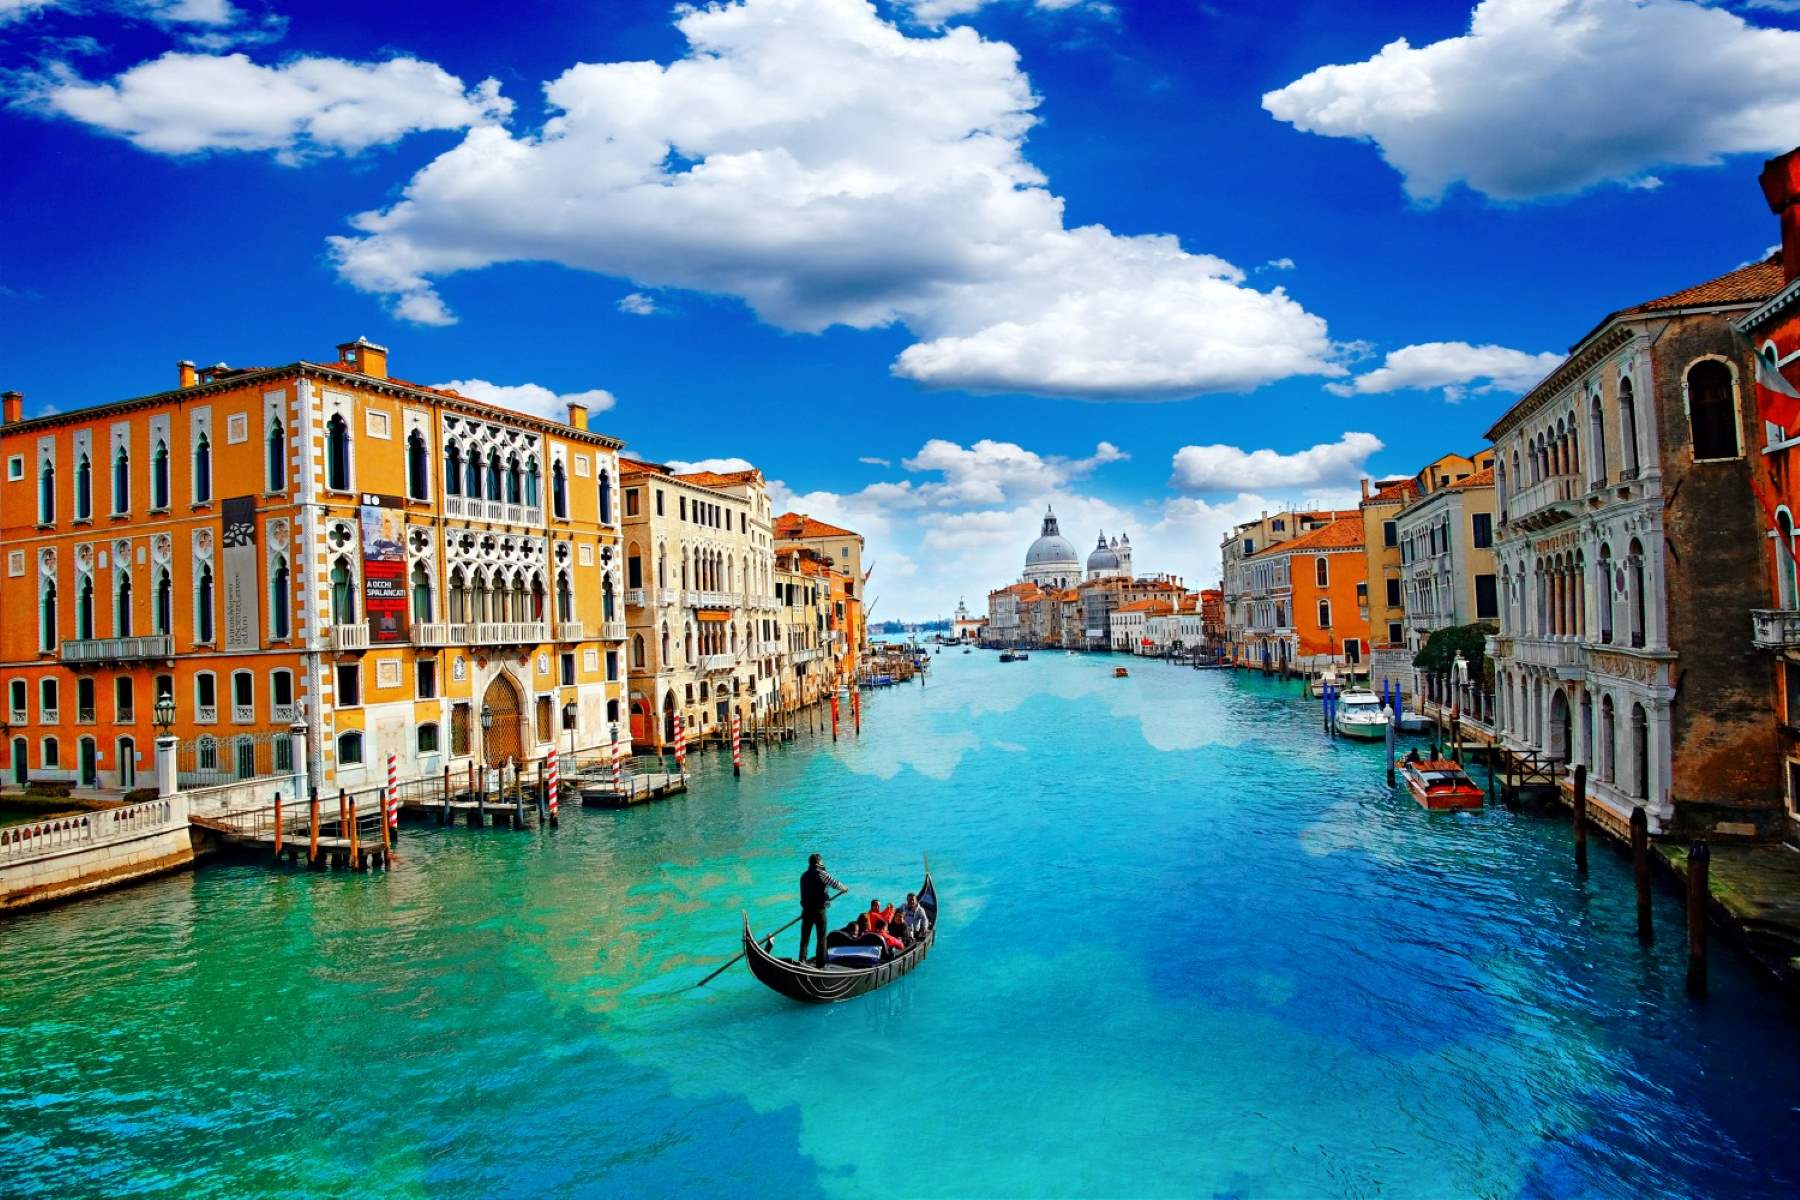 venice-gondola-rides-how-to-rent-one-plus-some-history